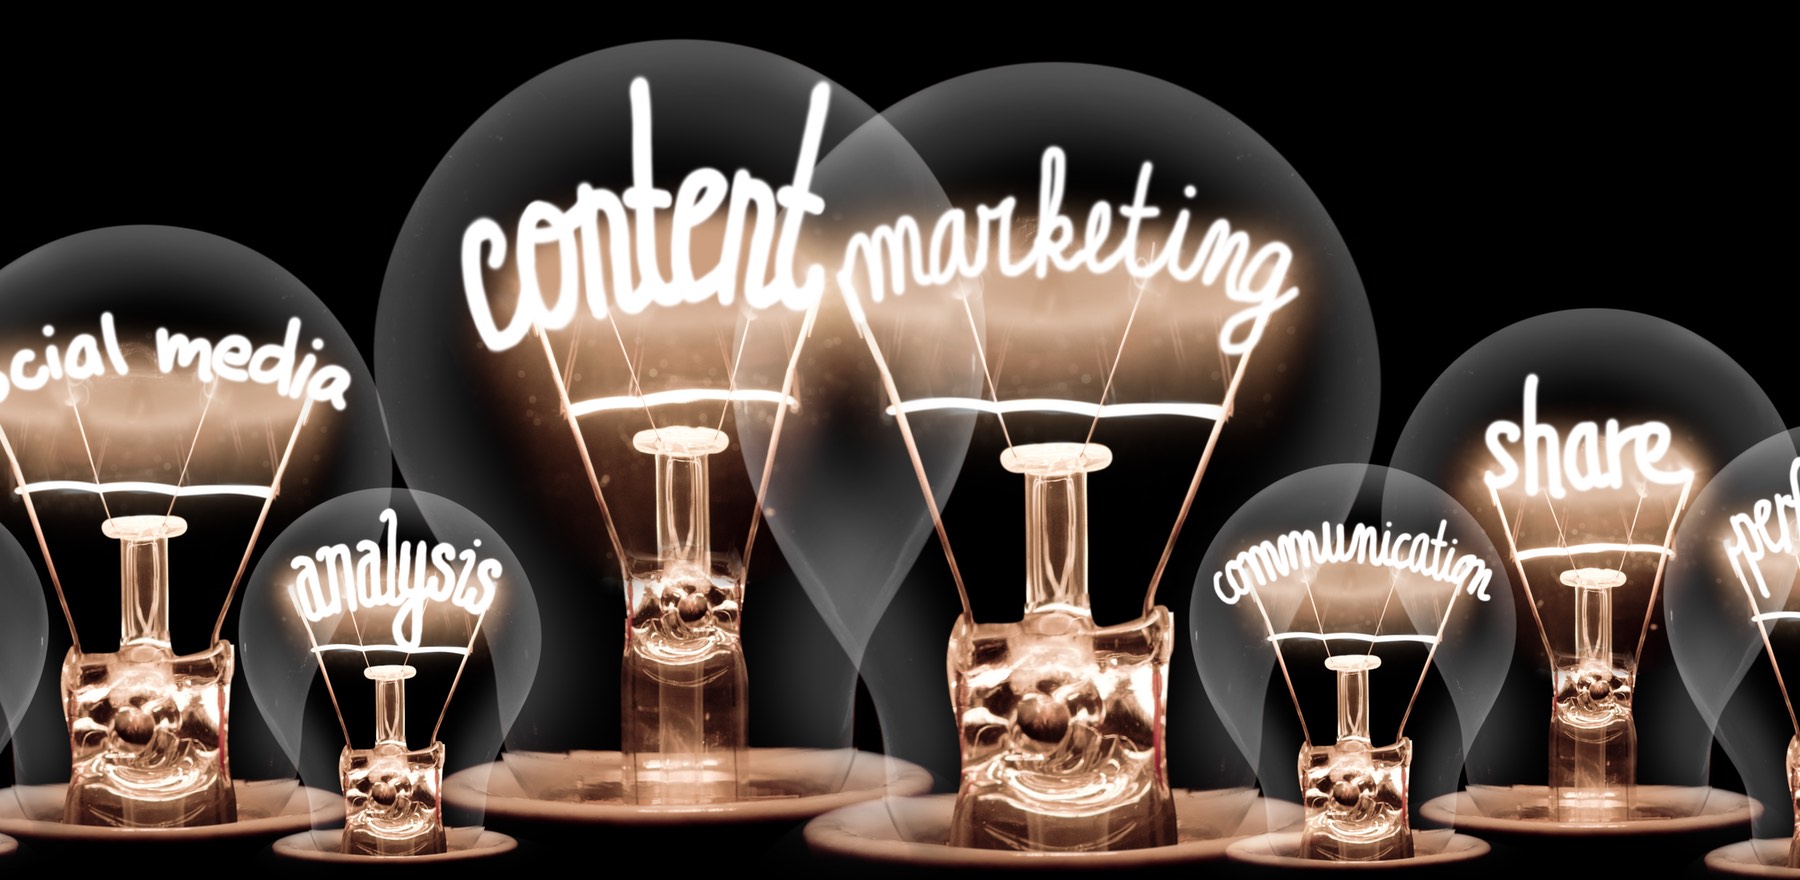 Content Marketing for Reputation